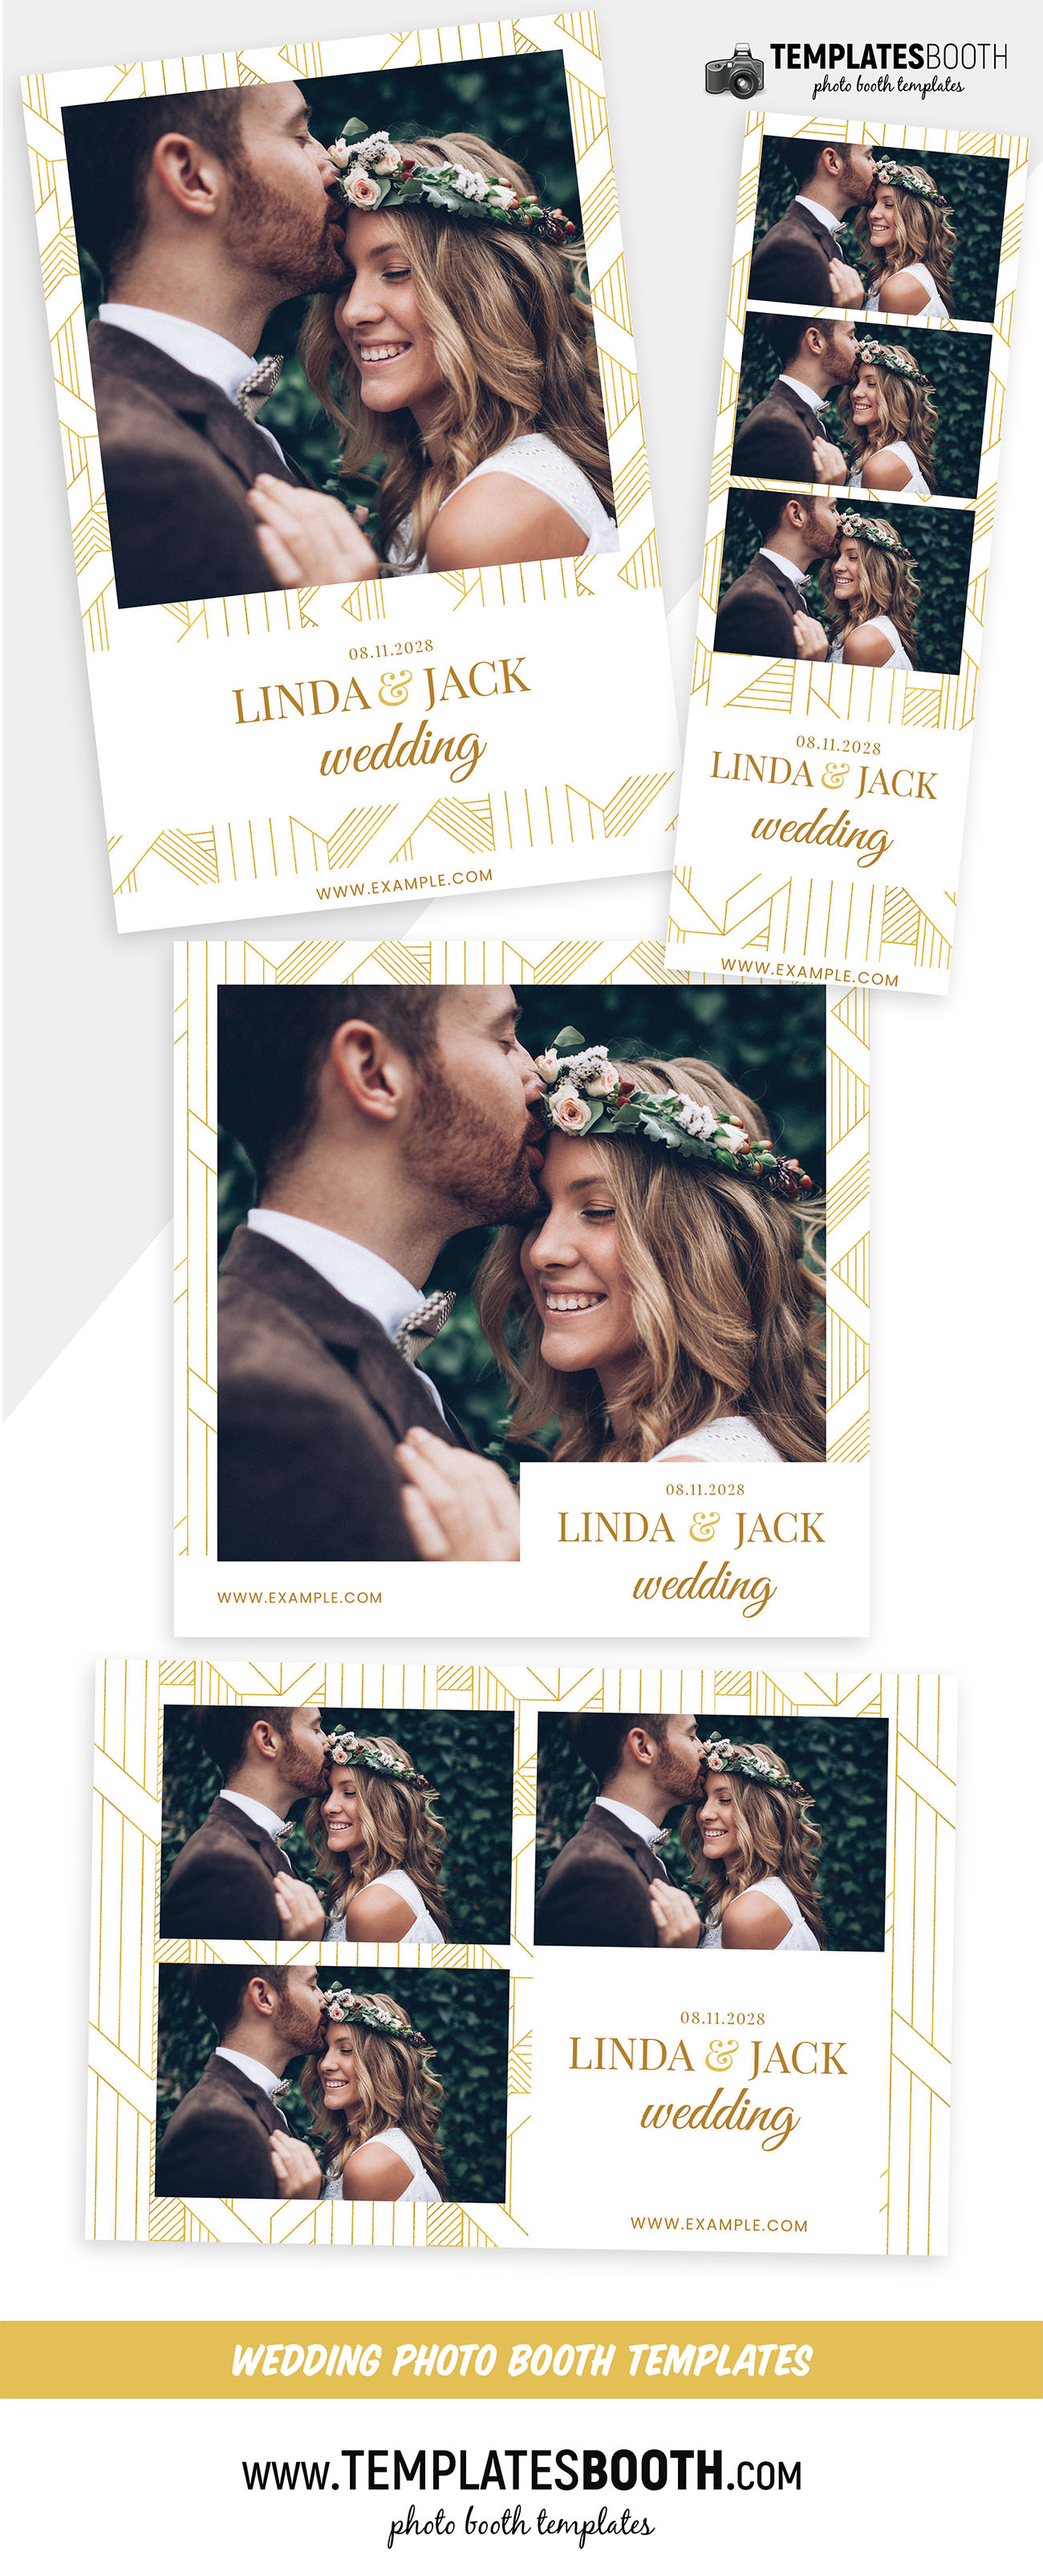 dslr photo booth templates layout